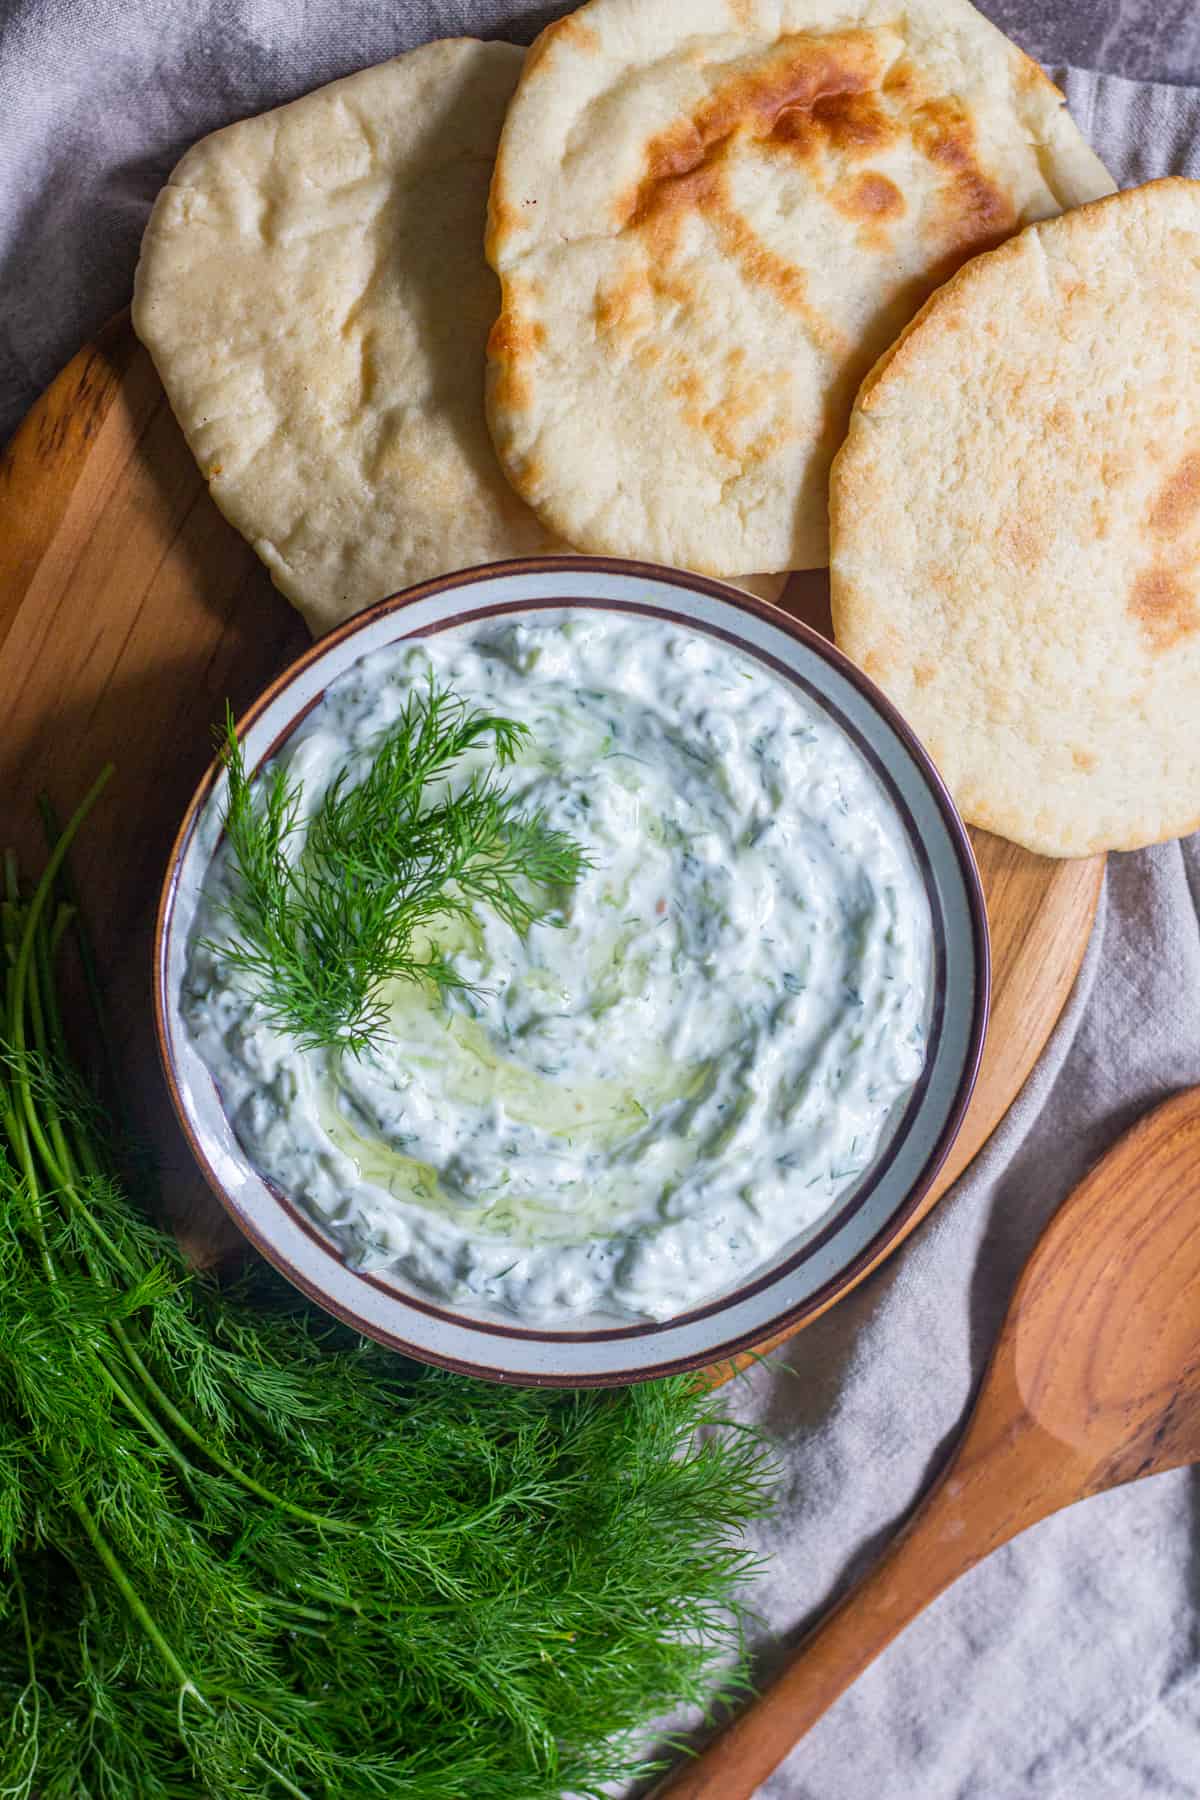 This classic tzatziki recipe is made with just a few ingredients and will be ready in only 10 minutes. It's perfect for vegetables, meat, or simply as a dip. Check out our video and step-by-step tutorial.